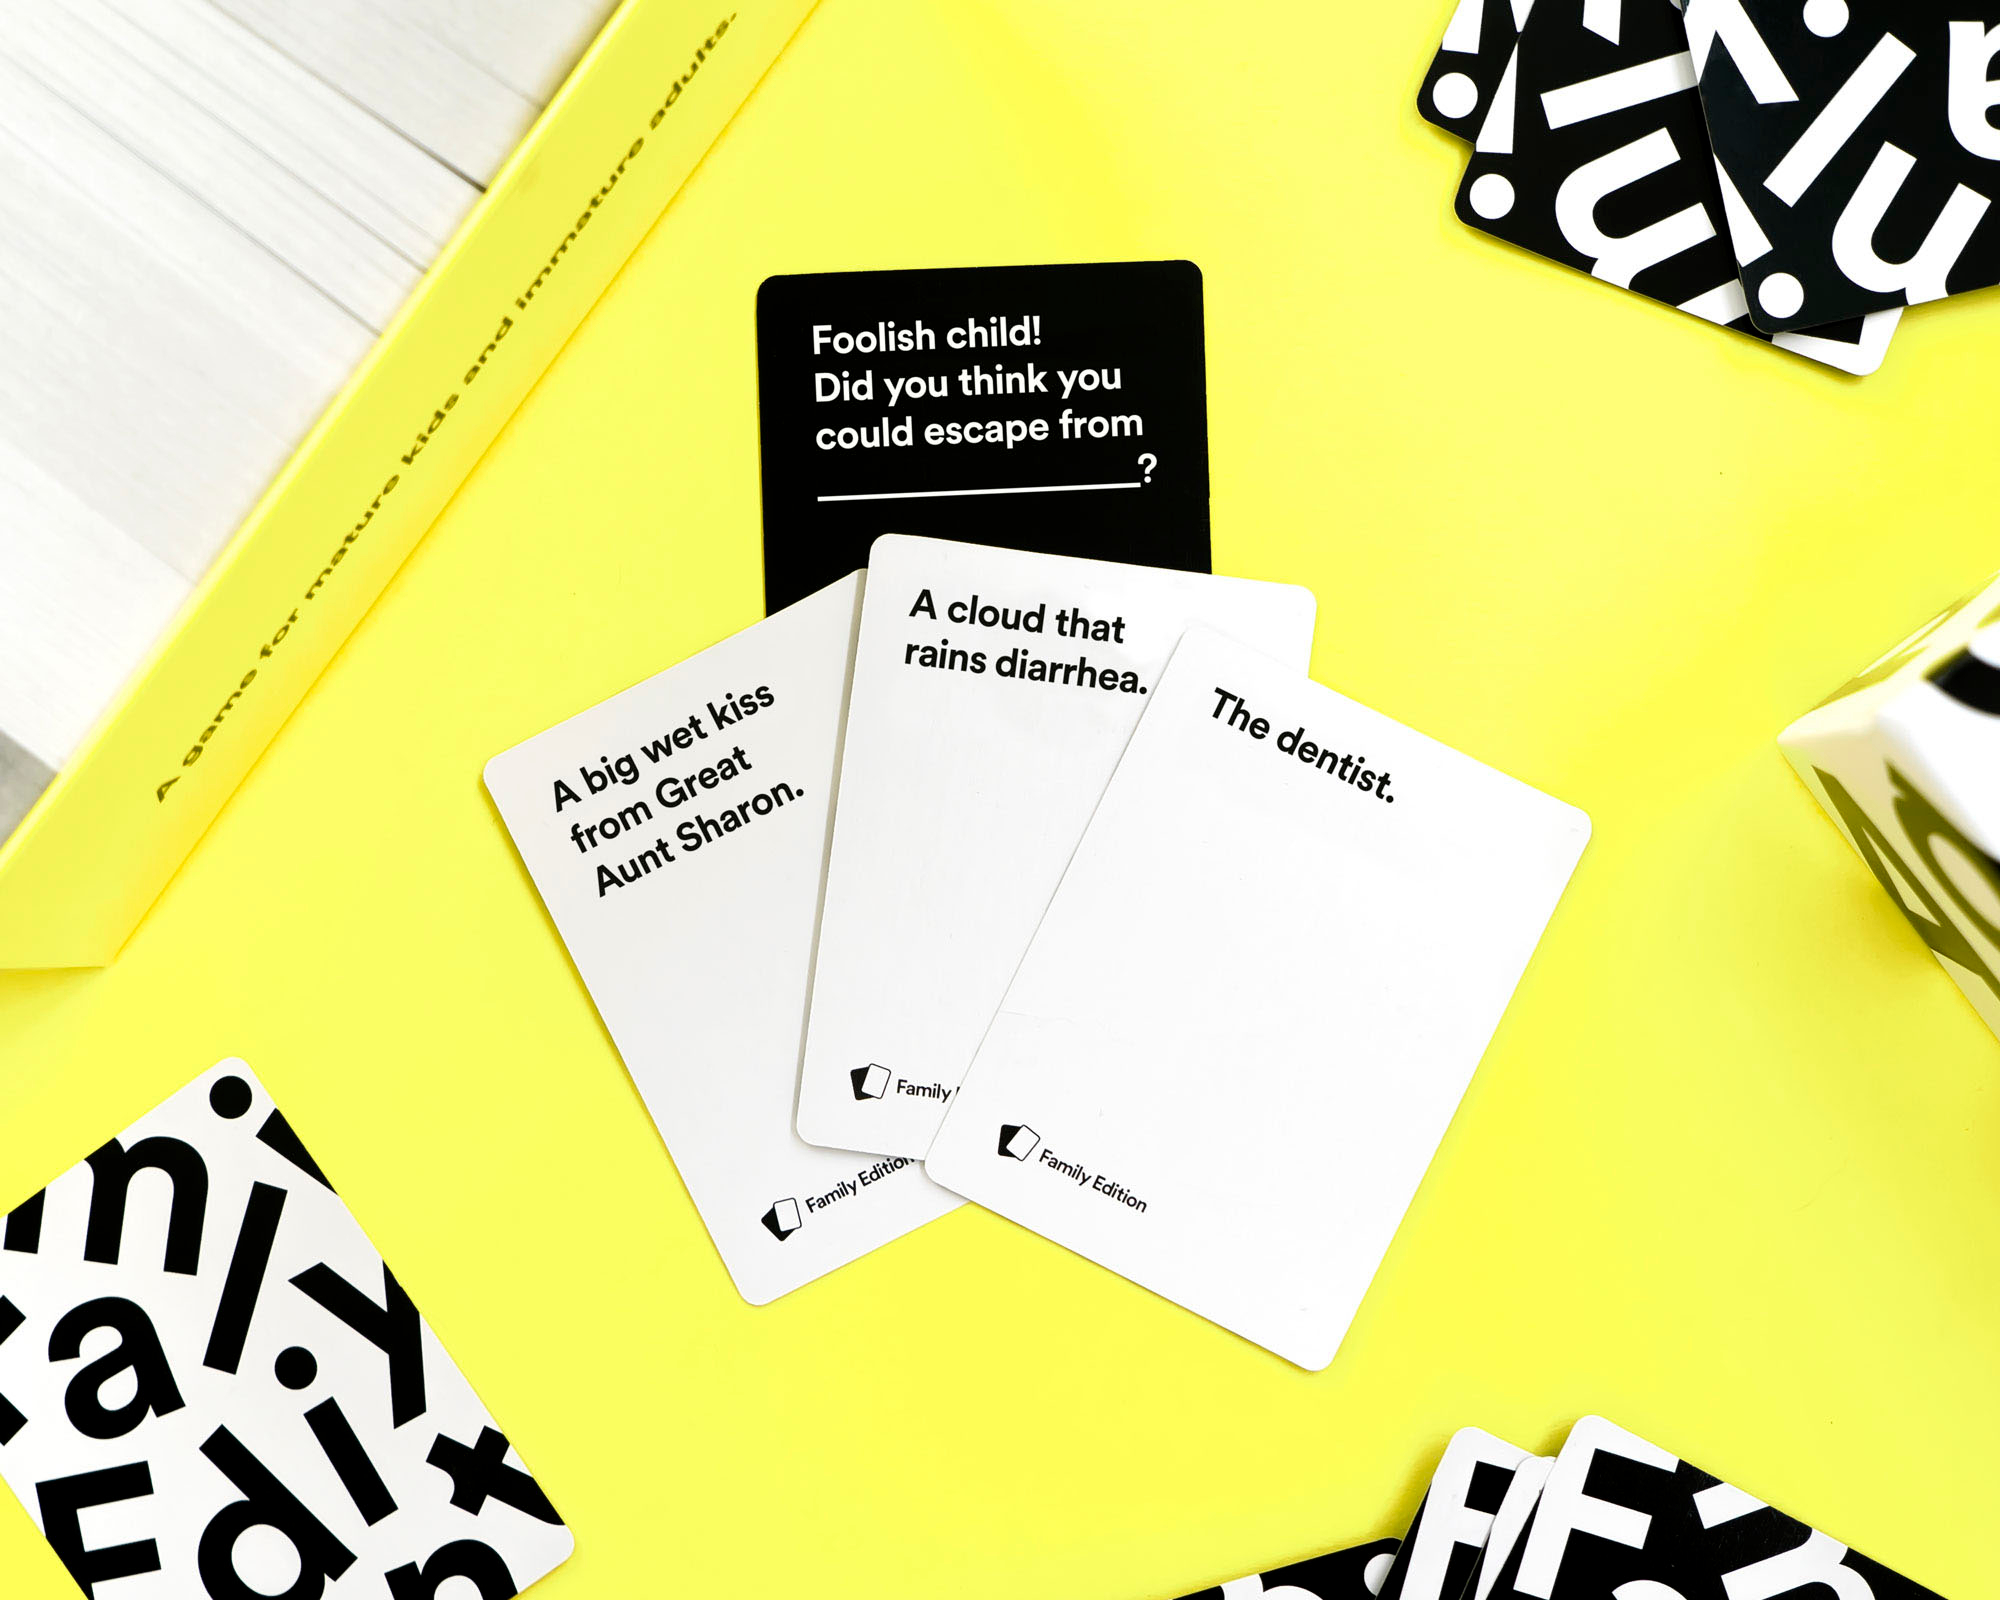 Left View: Cards Against Humanity - Cards Against Humanity: Family Edition Main Game - Black/White